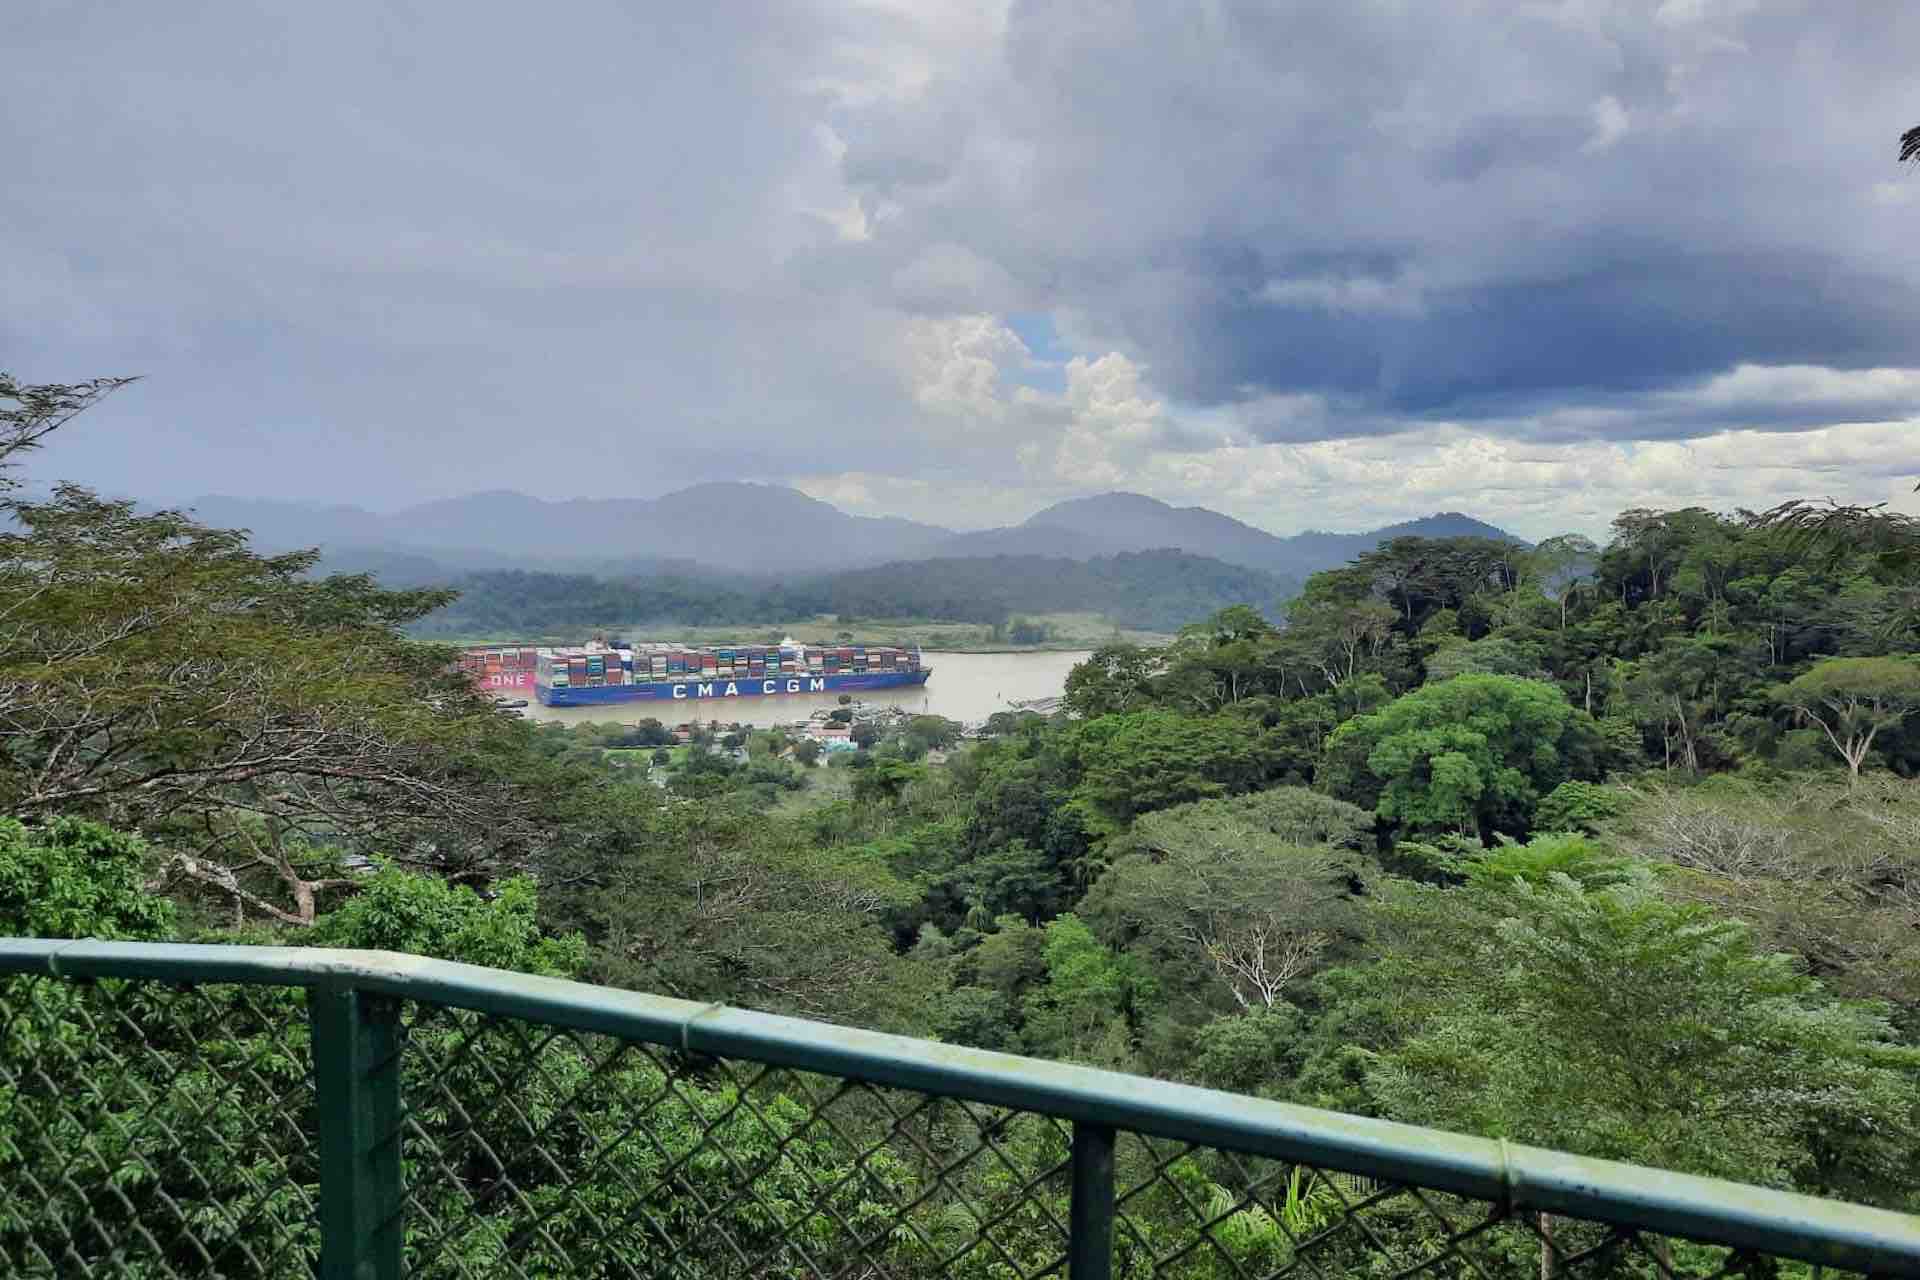 Aerial Tram Gamboa Resort Panama observation tower panama canal view of cargo ships